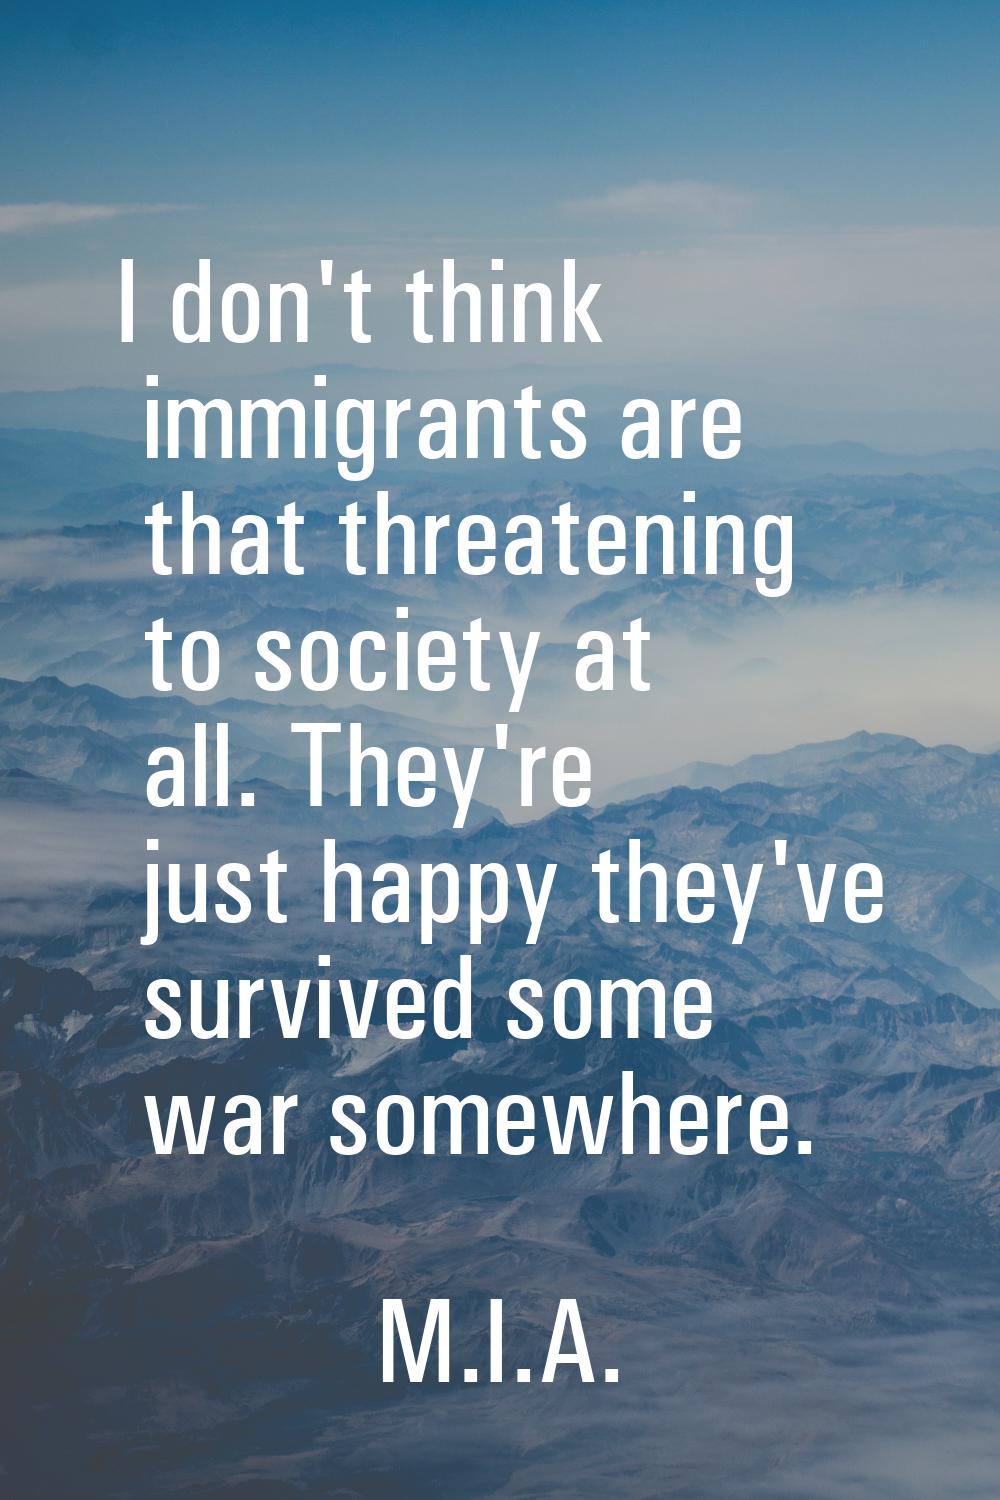 I don't think immigrants are that threatening to society at all. They're just happy they've survive